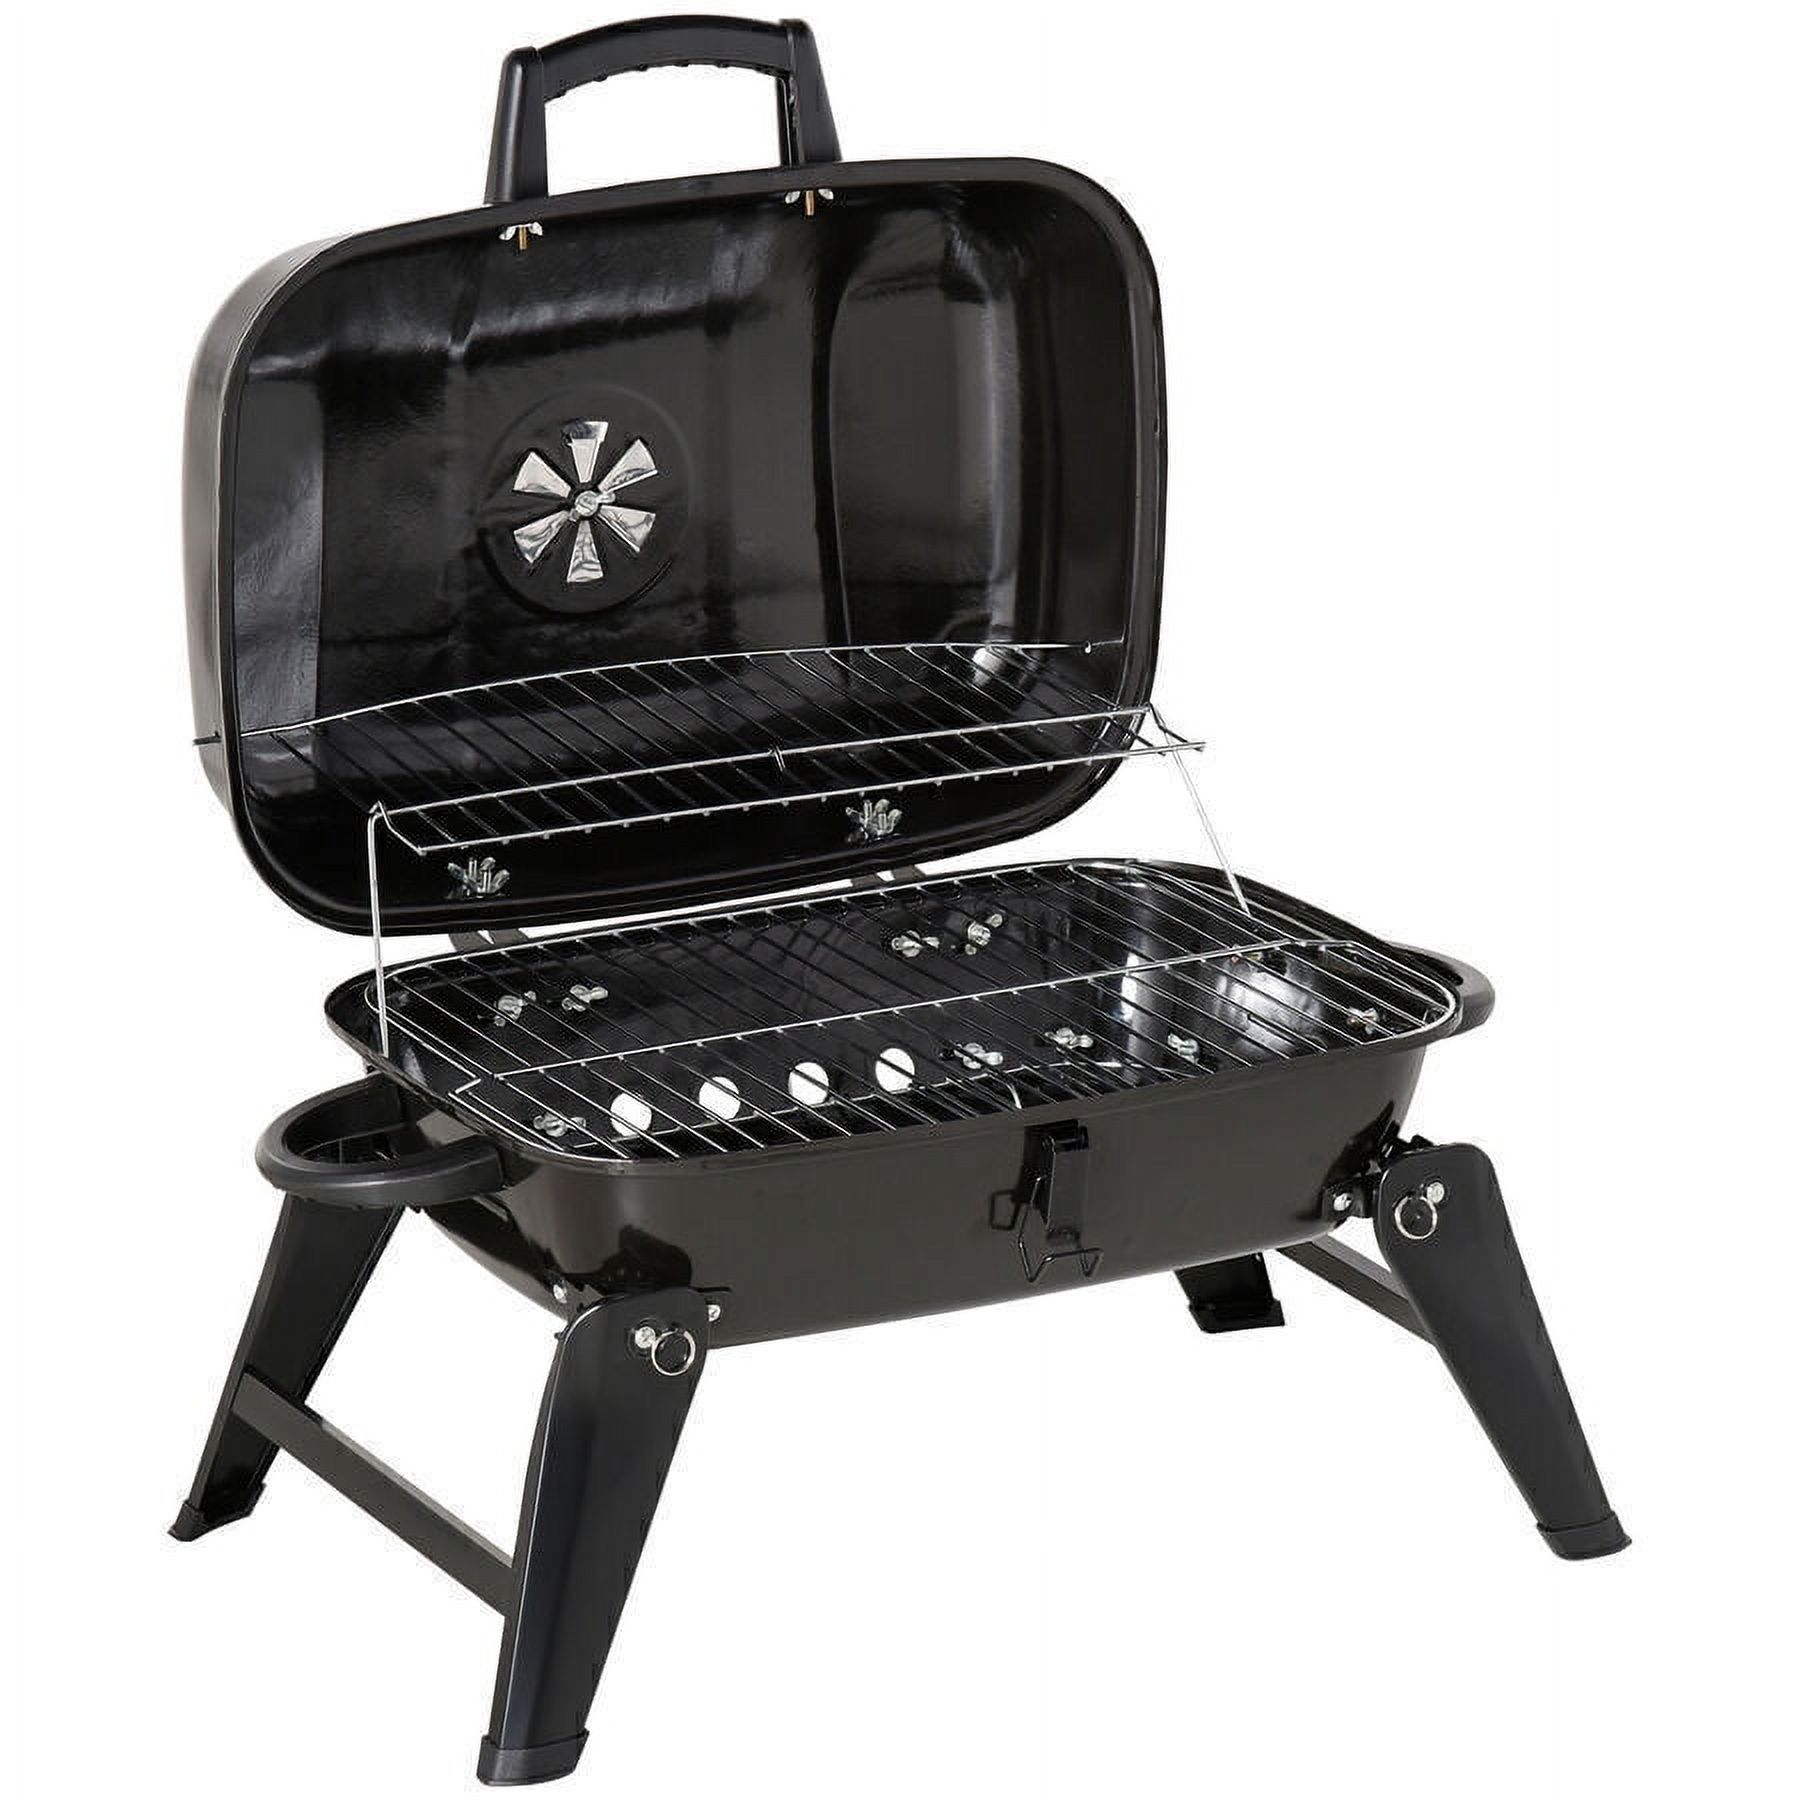 Outsunny 14" Portable Charcoal Grill, Tabletop Small BBQ Grill for Outdoor Cooking, Camping, Tailgating, Enamel Coated, Vent, Folding Legs, Black - image 1 of 9